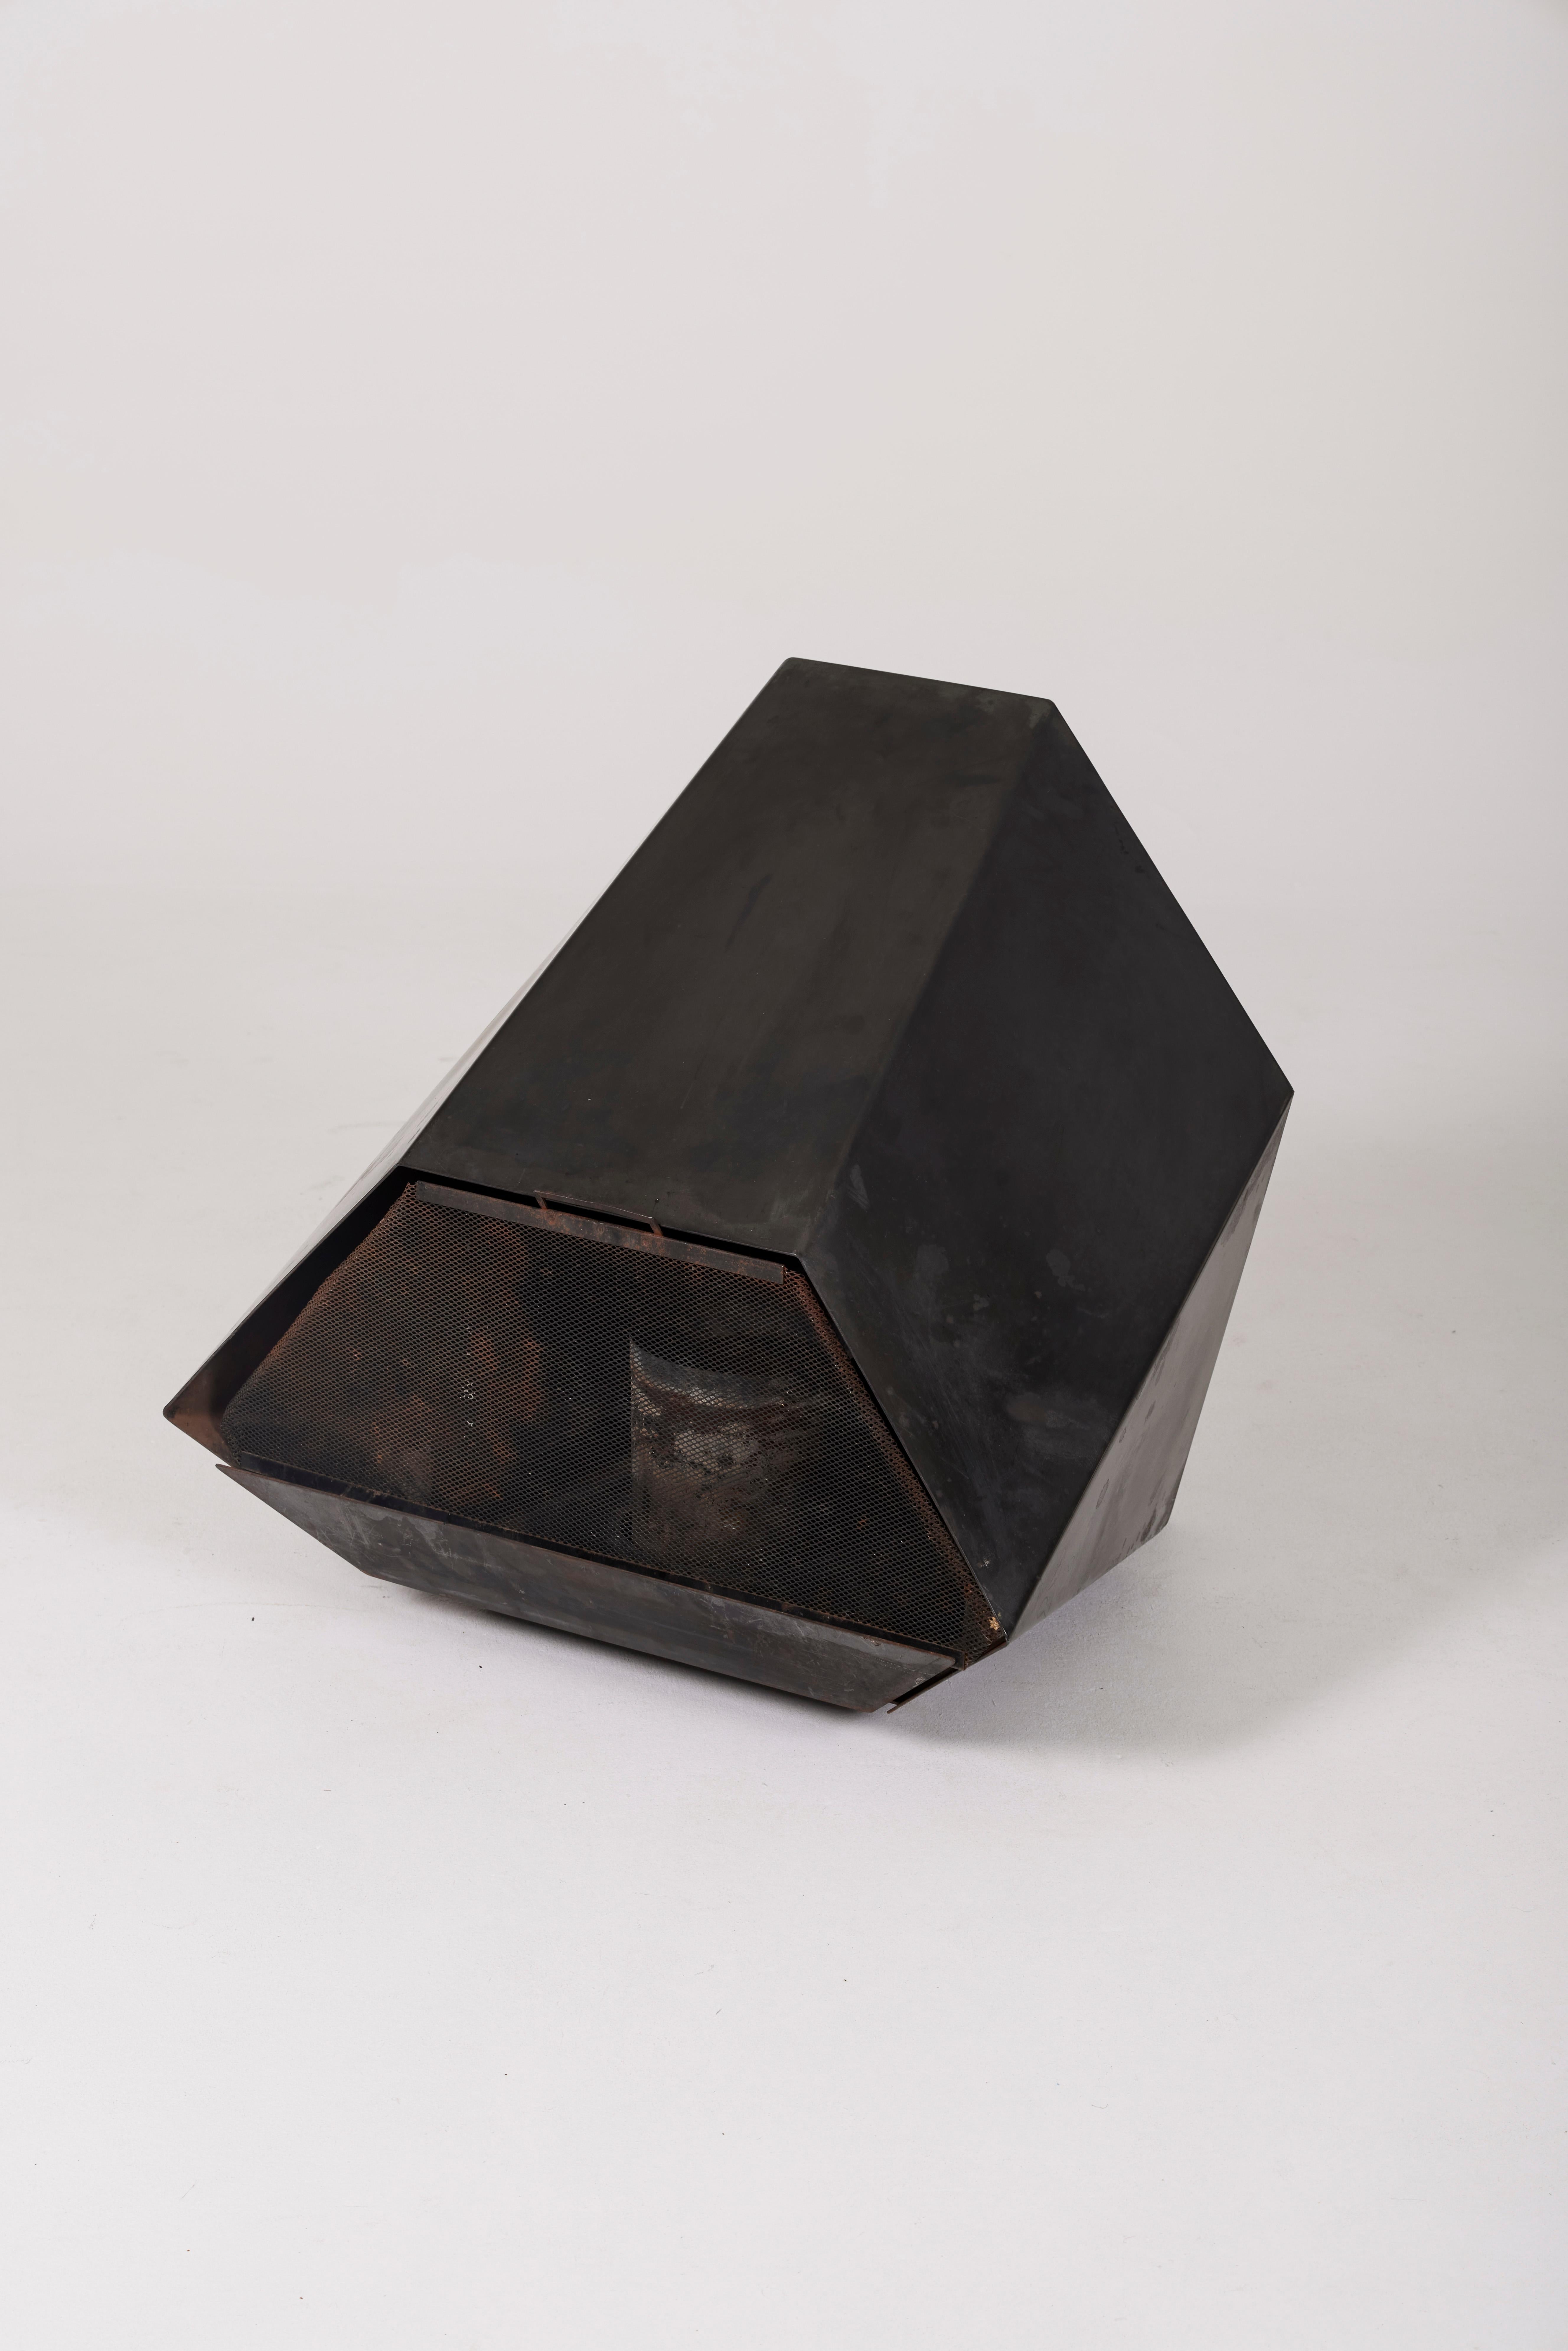 Wall-mounted diamond-shaped fireplace in weathered steel. Good condition. Lp1242.